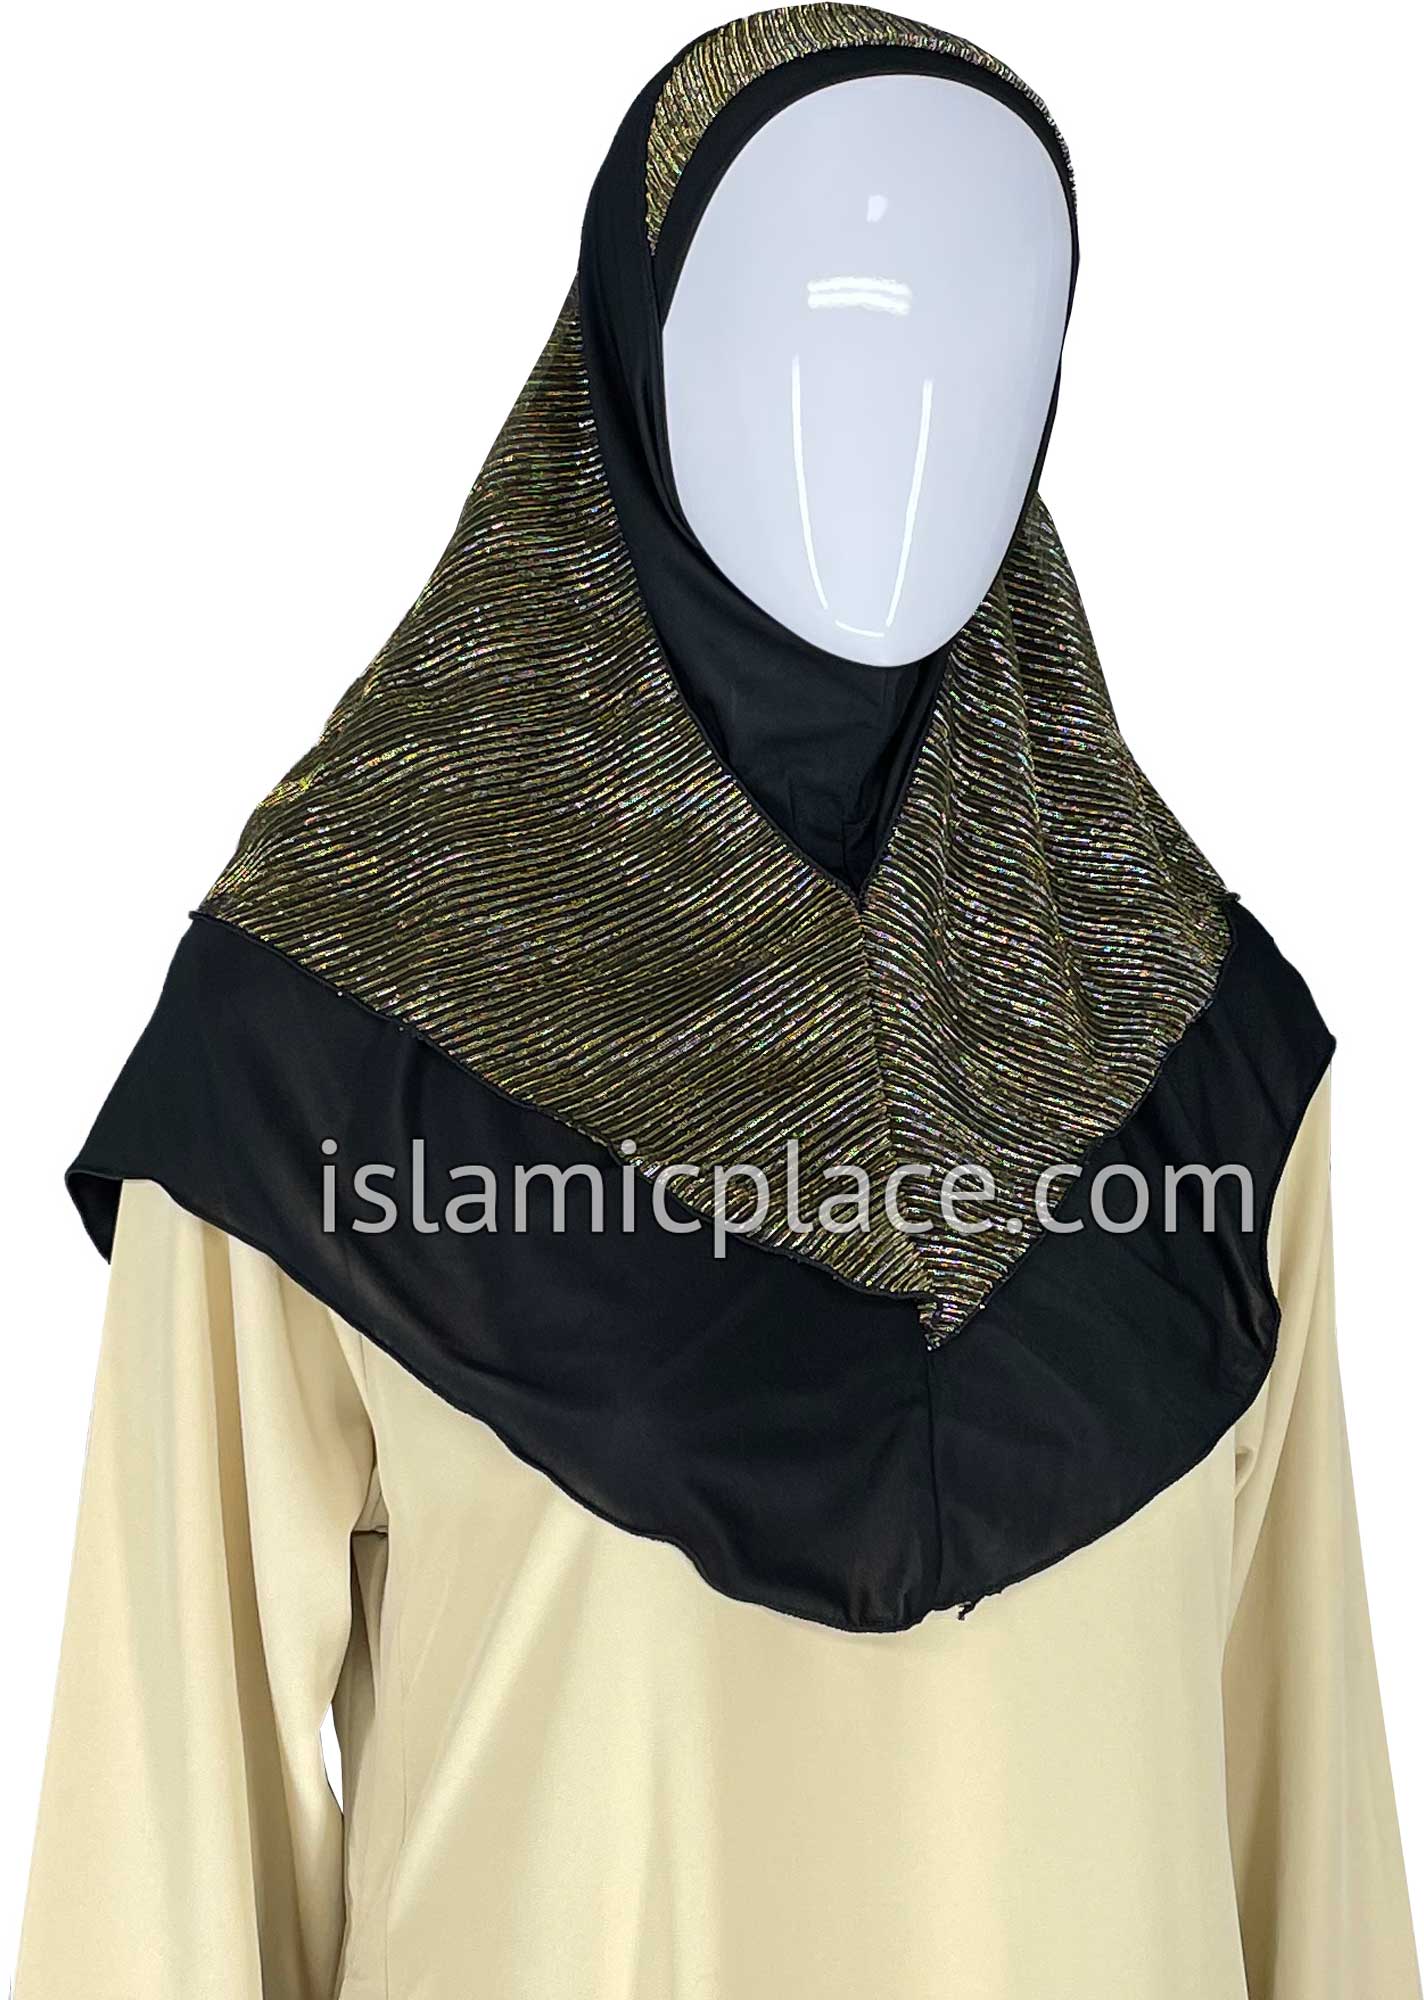 Black and Gold - Sparle Net Style Teen to Adult (Large) Hijab Al-Amira (1-piece style) - Design 15